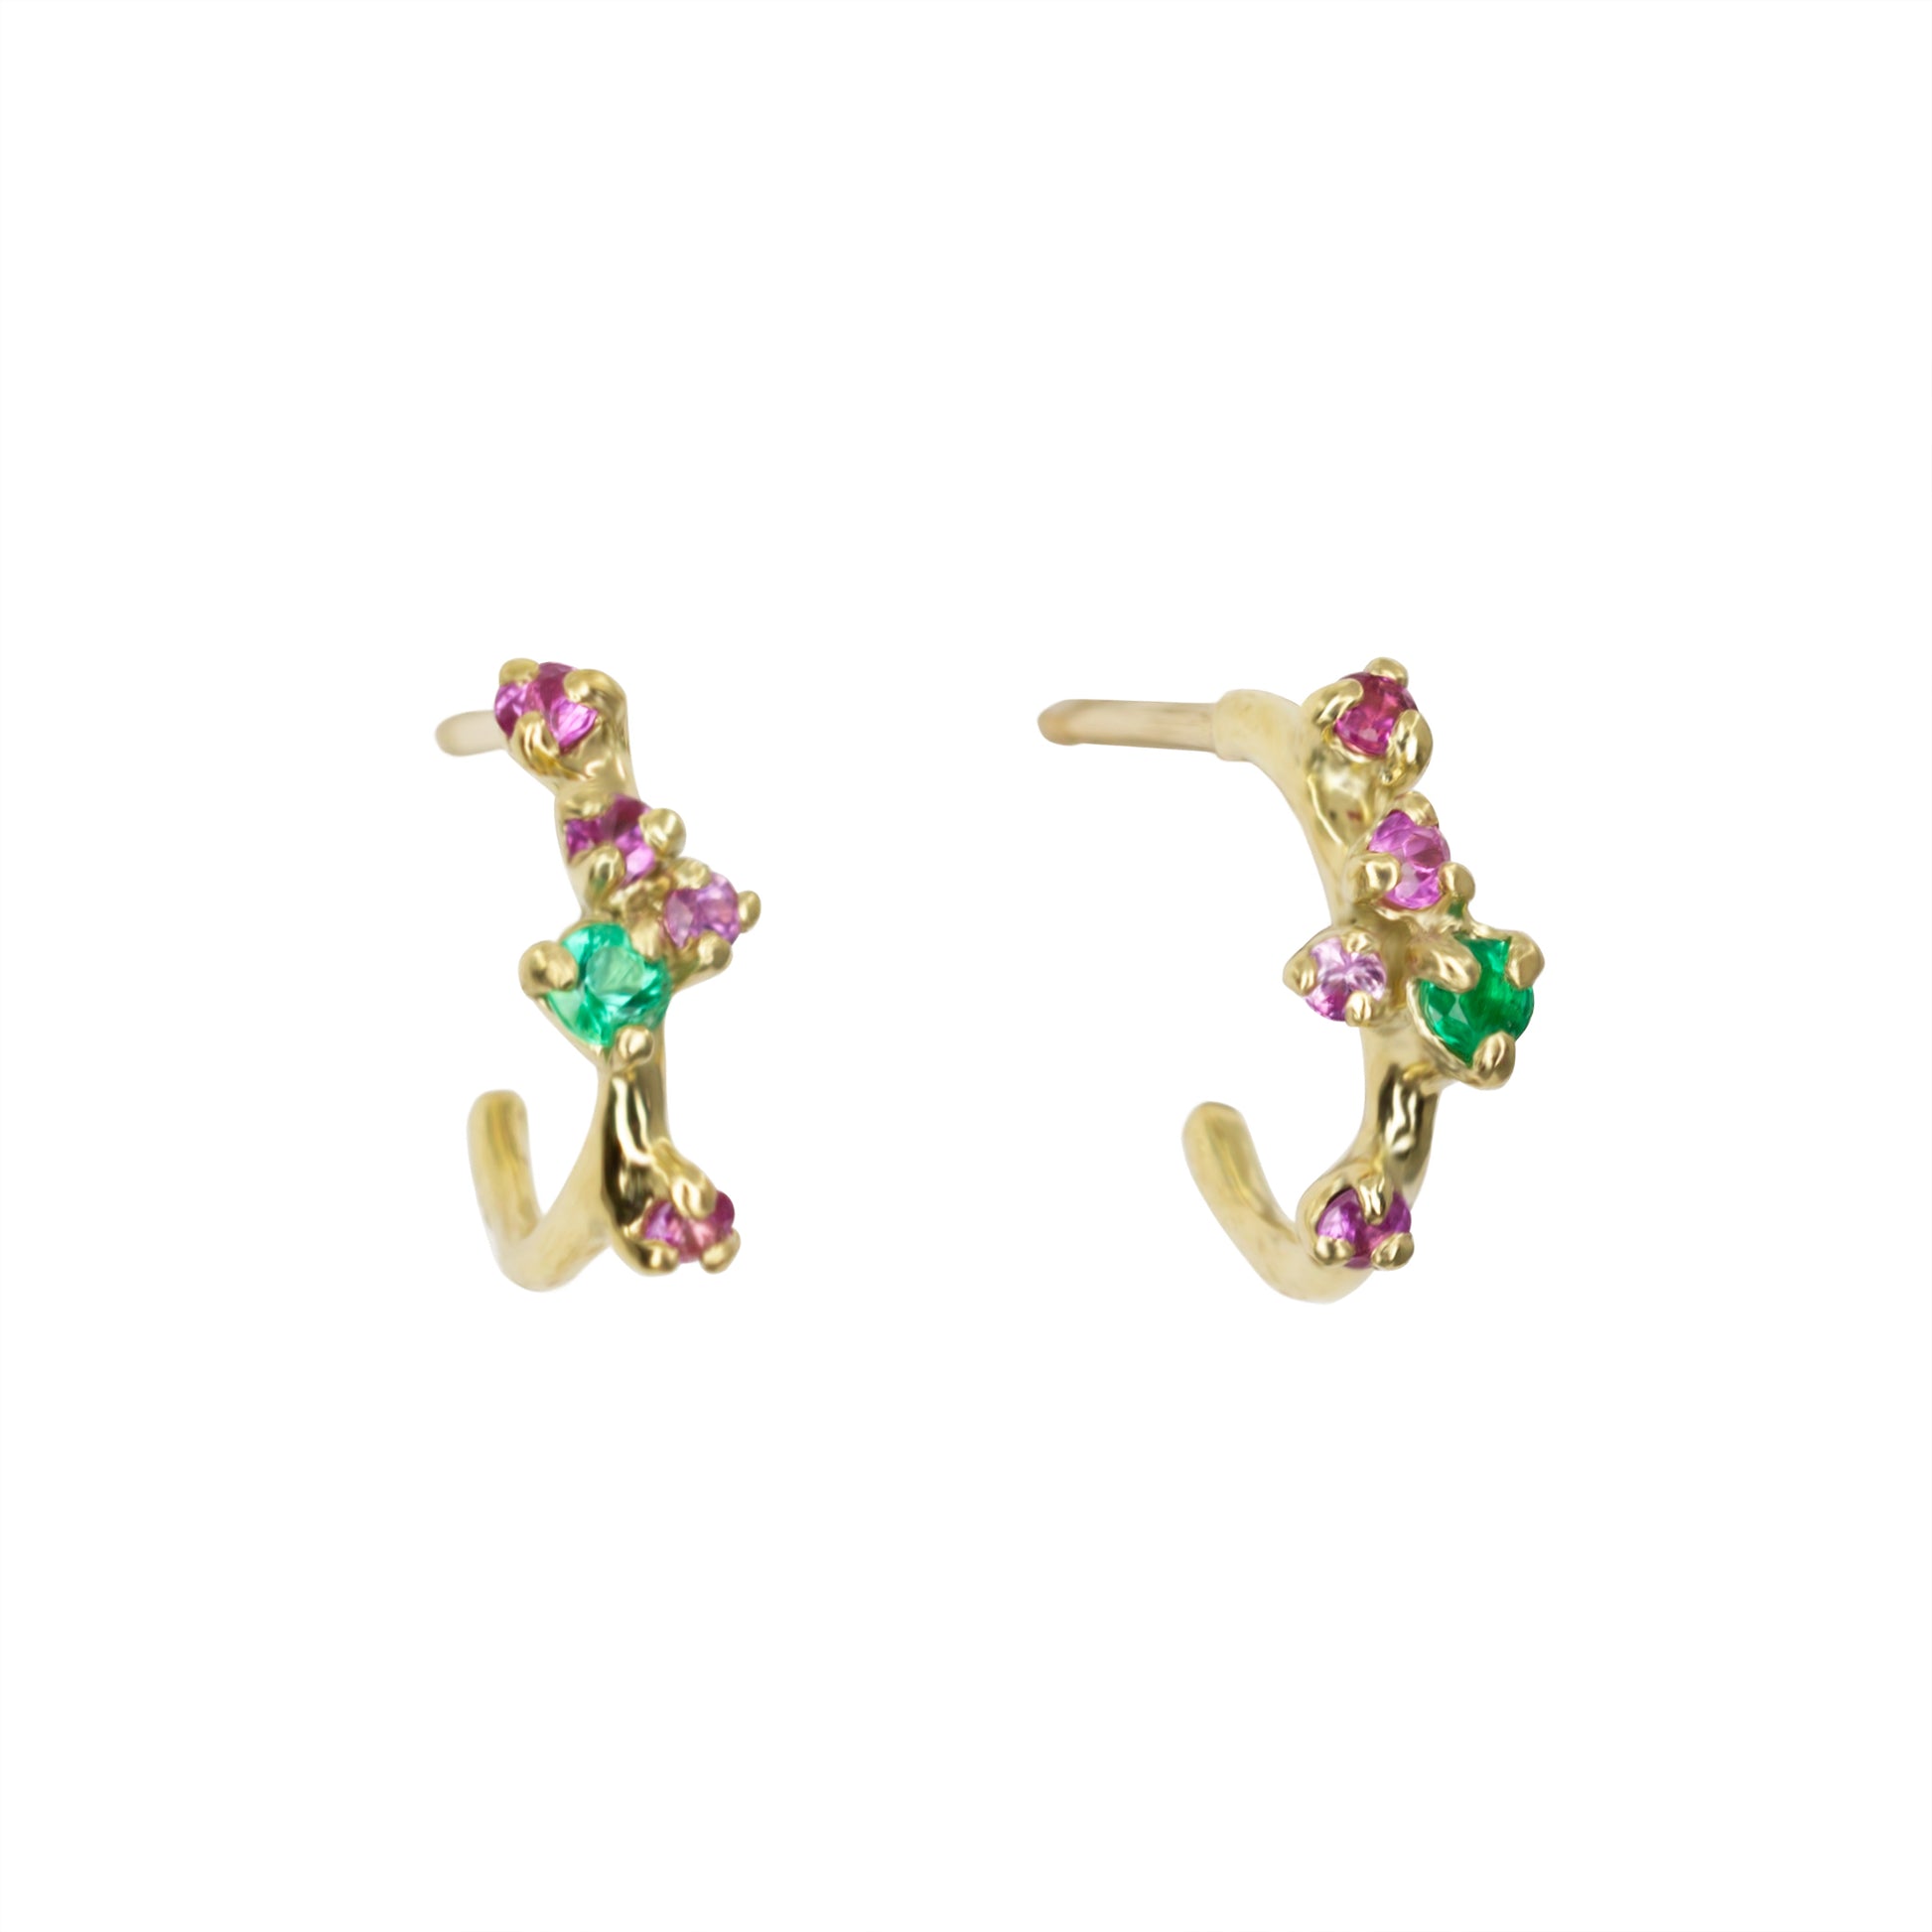 ANTHEIA HOOPS SMALL - EMERALD AND PINK SAPPHIRES - Irena Chmura Jewellery